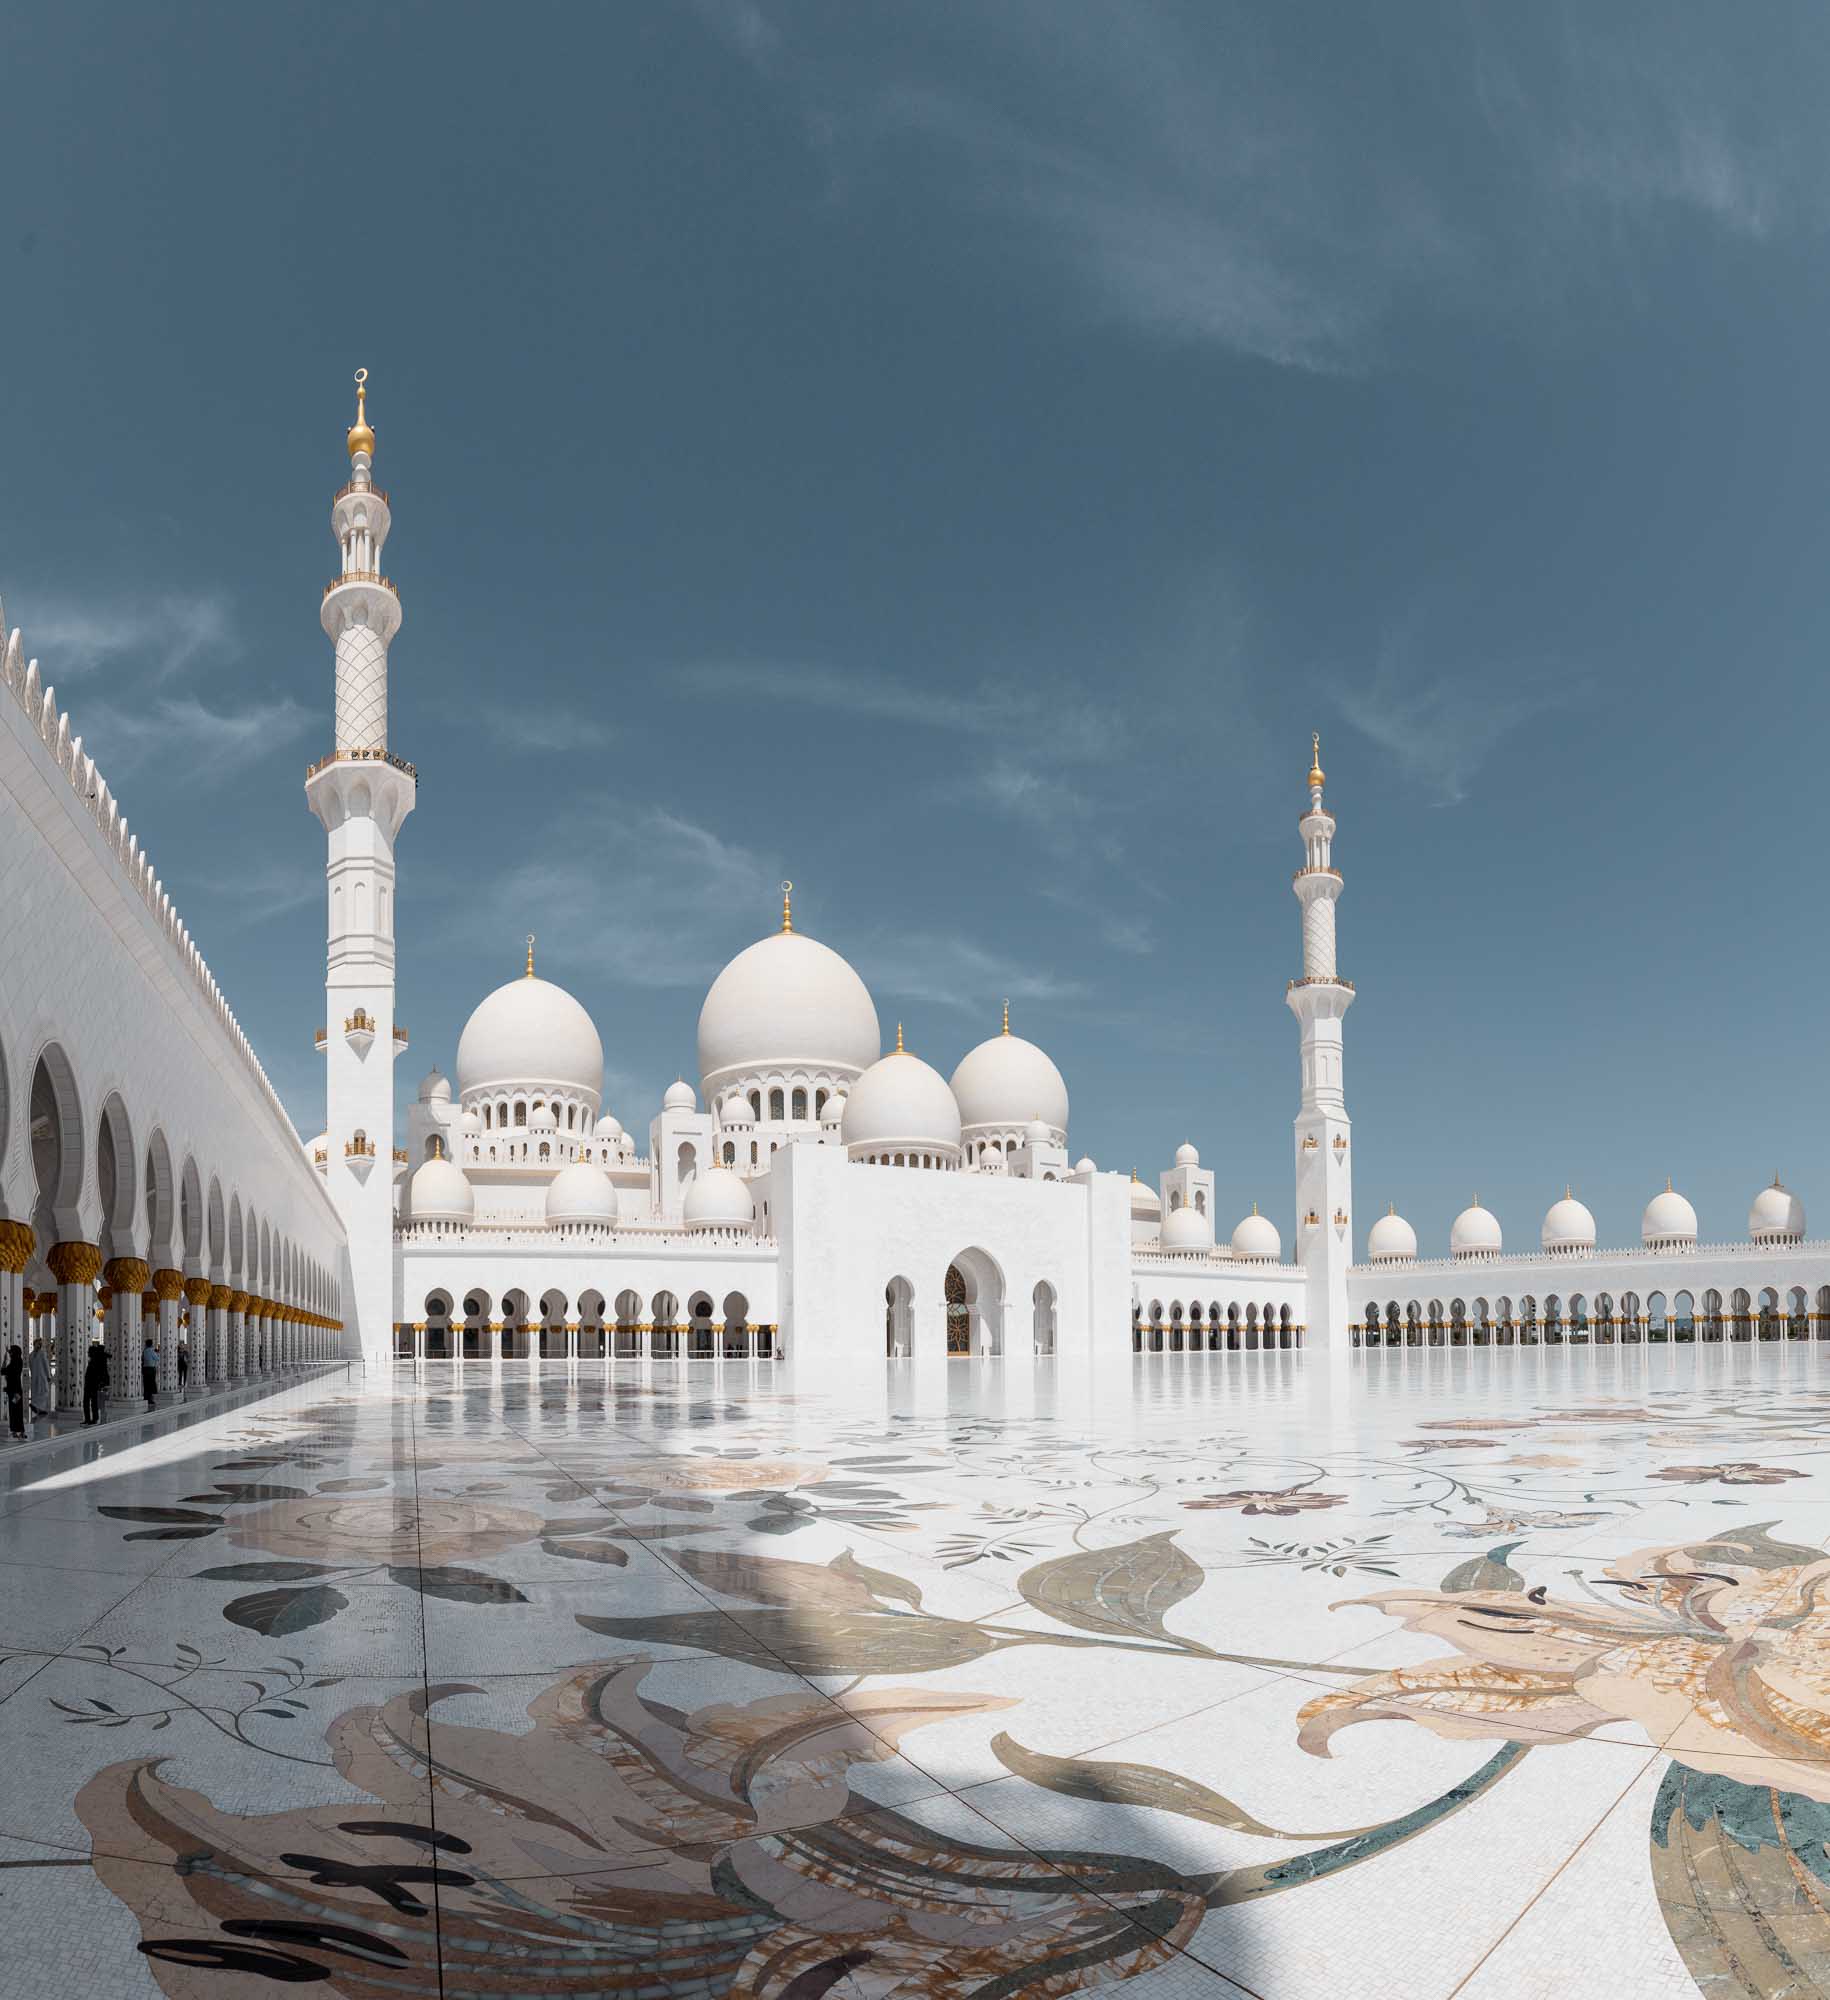 The Sheikh Zayed Grand Mosque in Abu Dhabi with its white marble domes and minarets, reflected on the glossy courtyard surface under a clear blue sky.